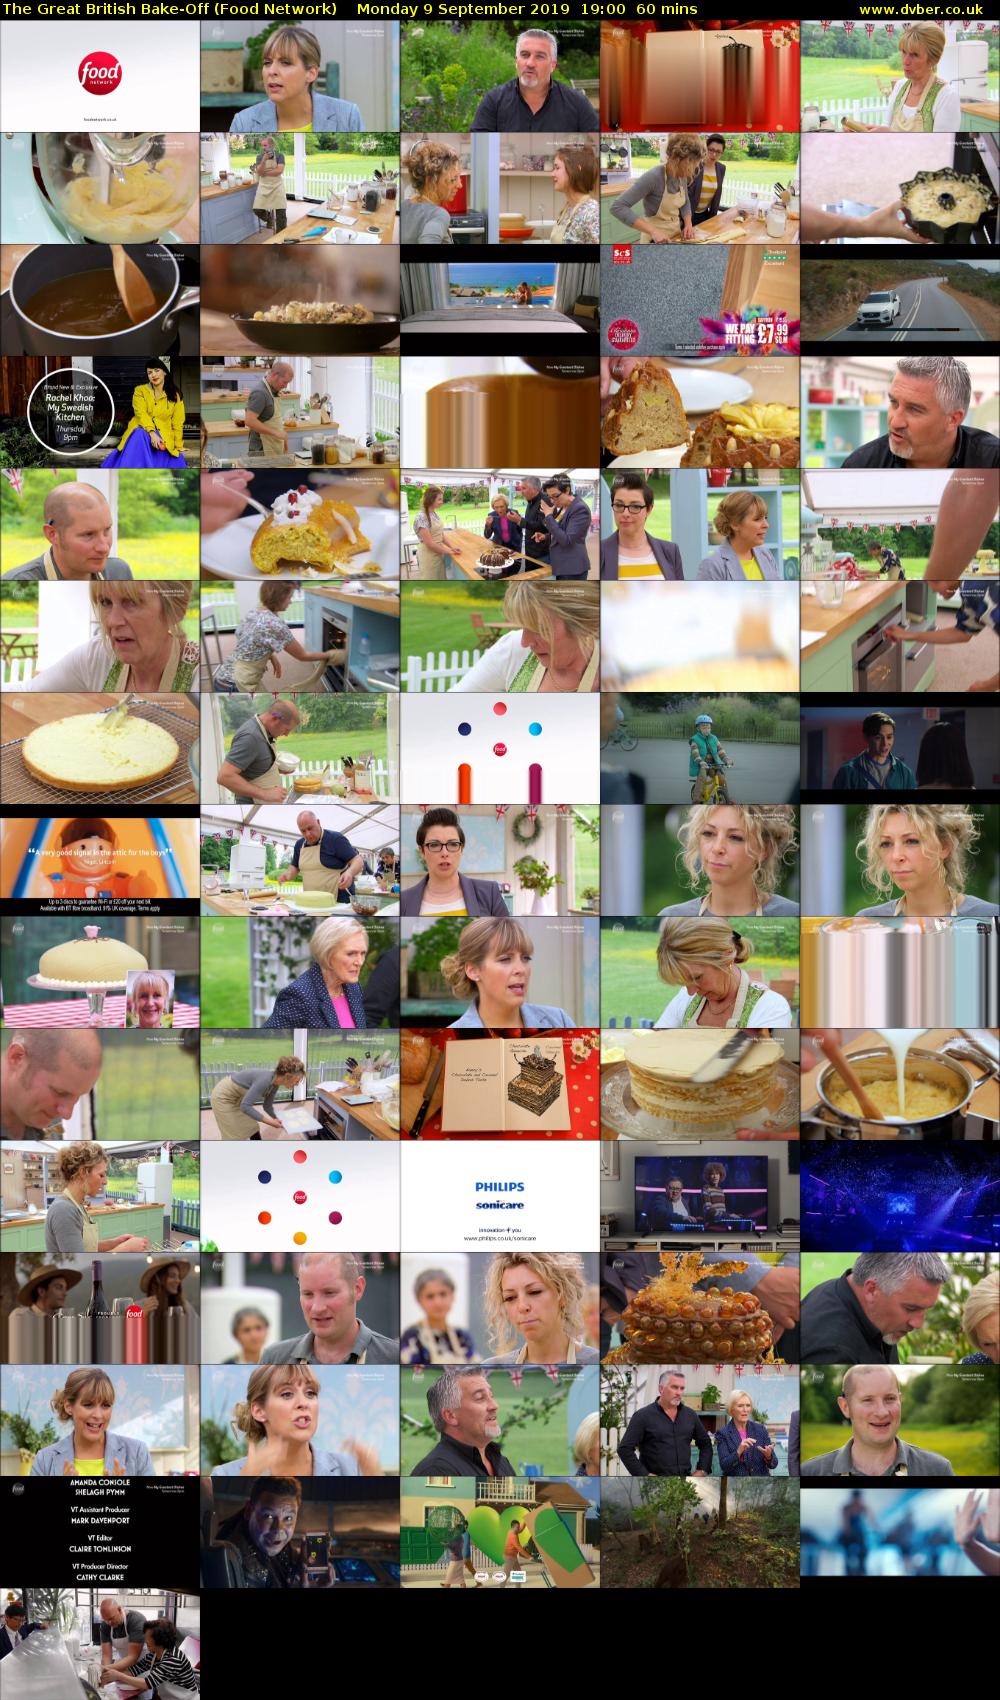 The Great British Bake-Off (Food Network) Monday 9 September 2019 19:00 - 20:00